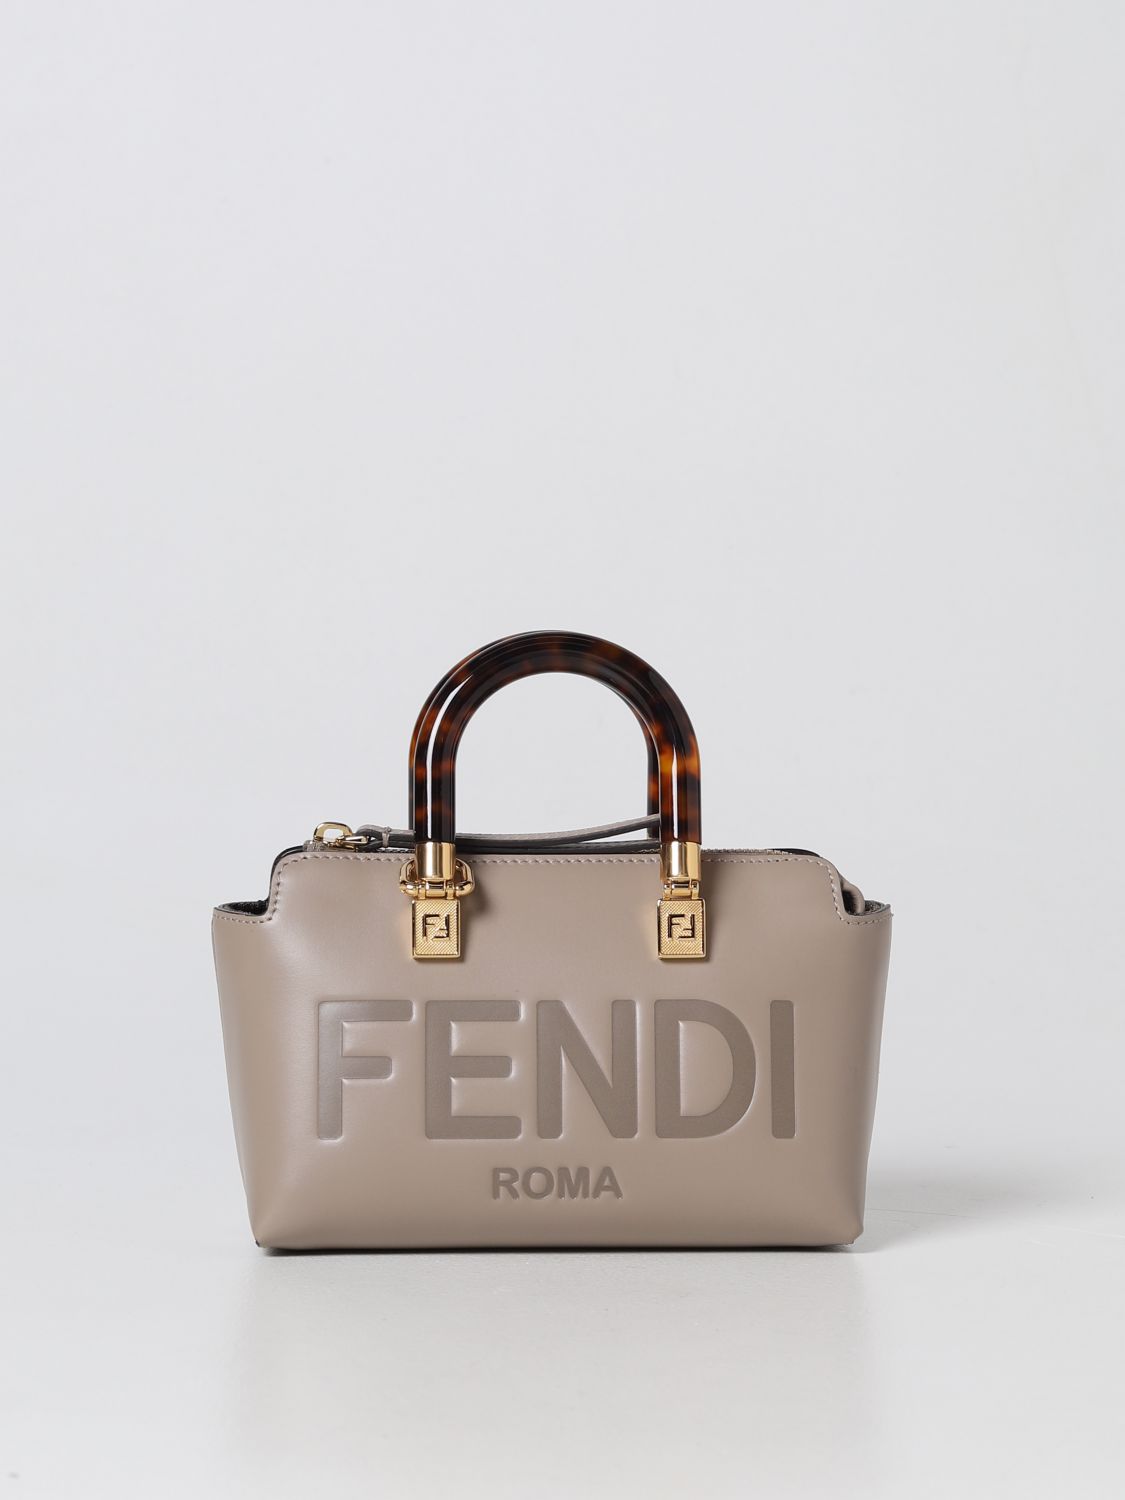 FENDI: By The Way bag in smooth leather - Dove Grey | Fendi mini